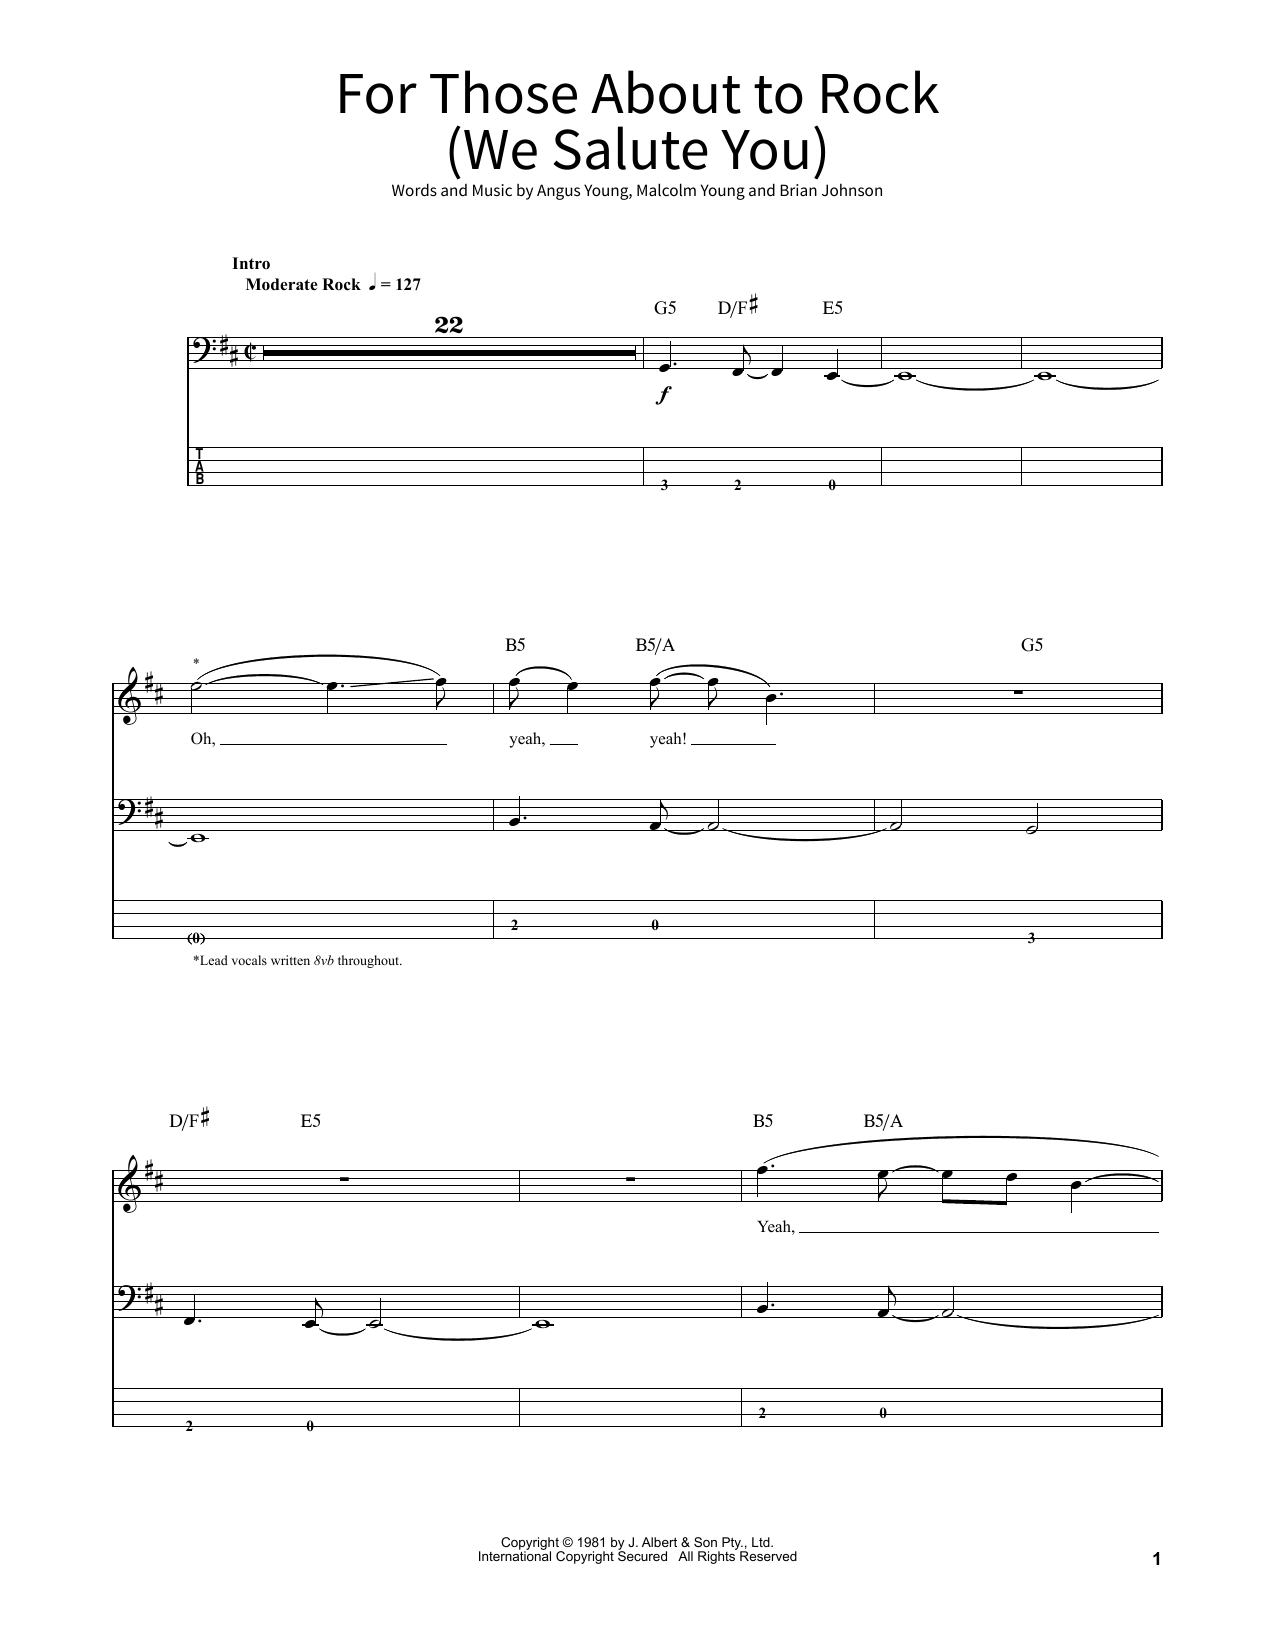 AC/DC For Those About To Rock (We Salute You) sheet music notes and chords. Download Printable PDF.